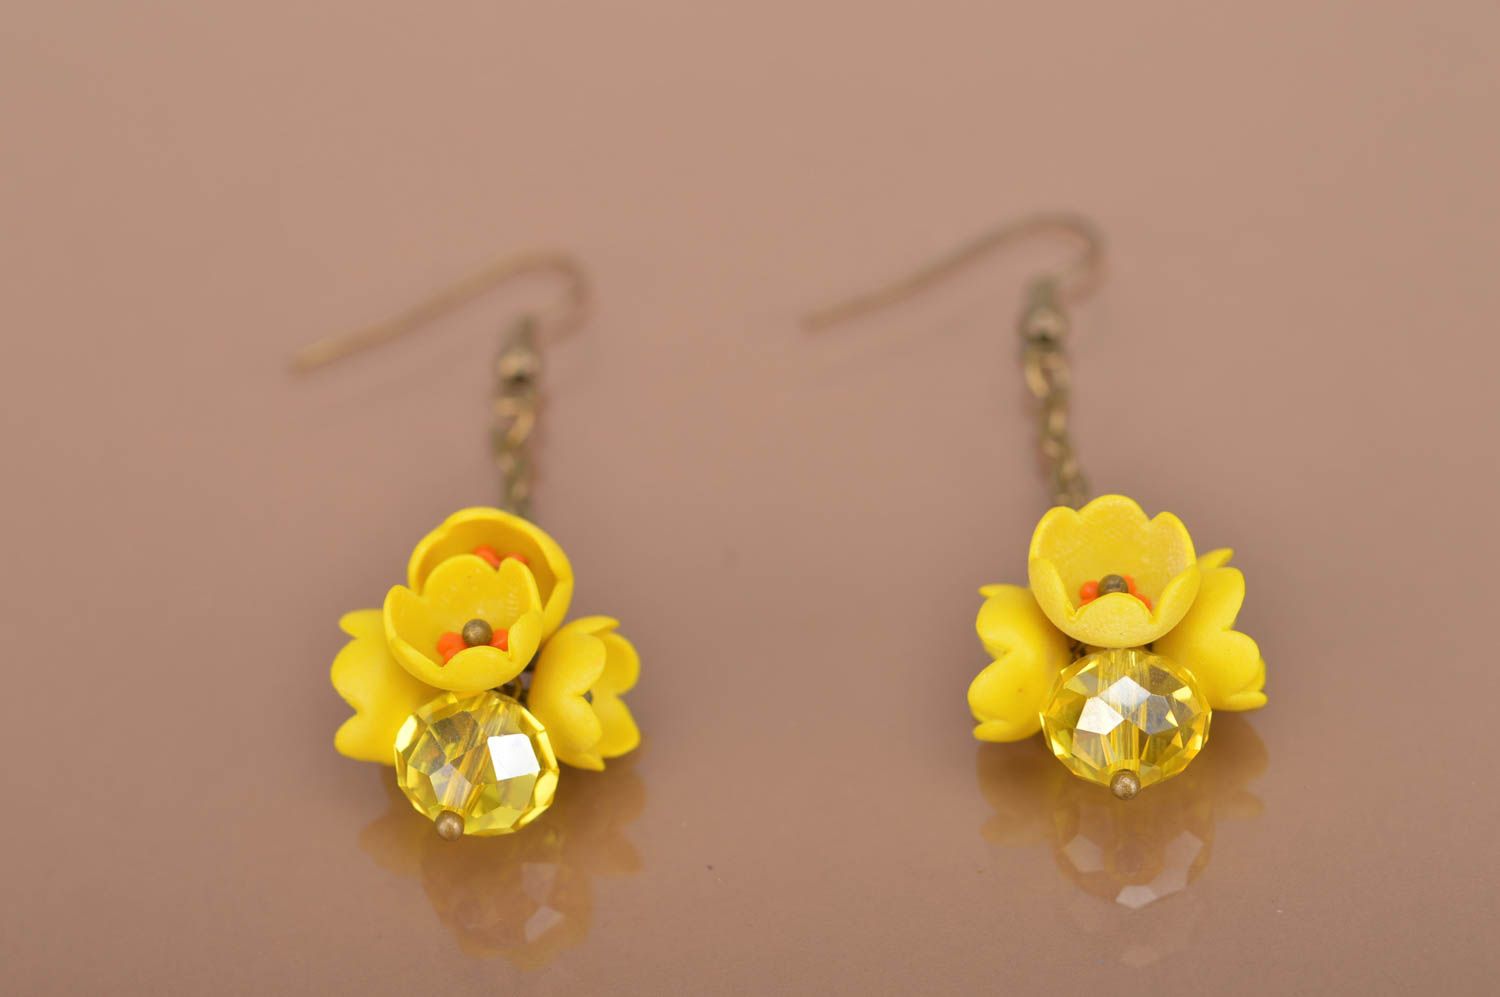 Unusual handmade plastic flower earrings fashion accessories gifts for her photo 4